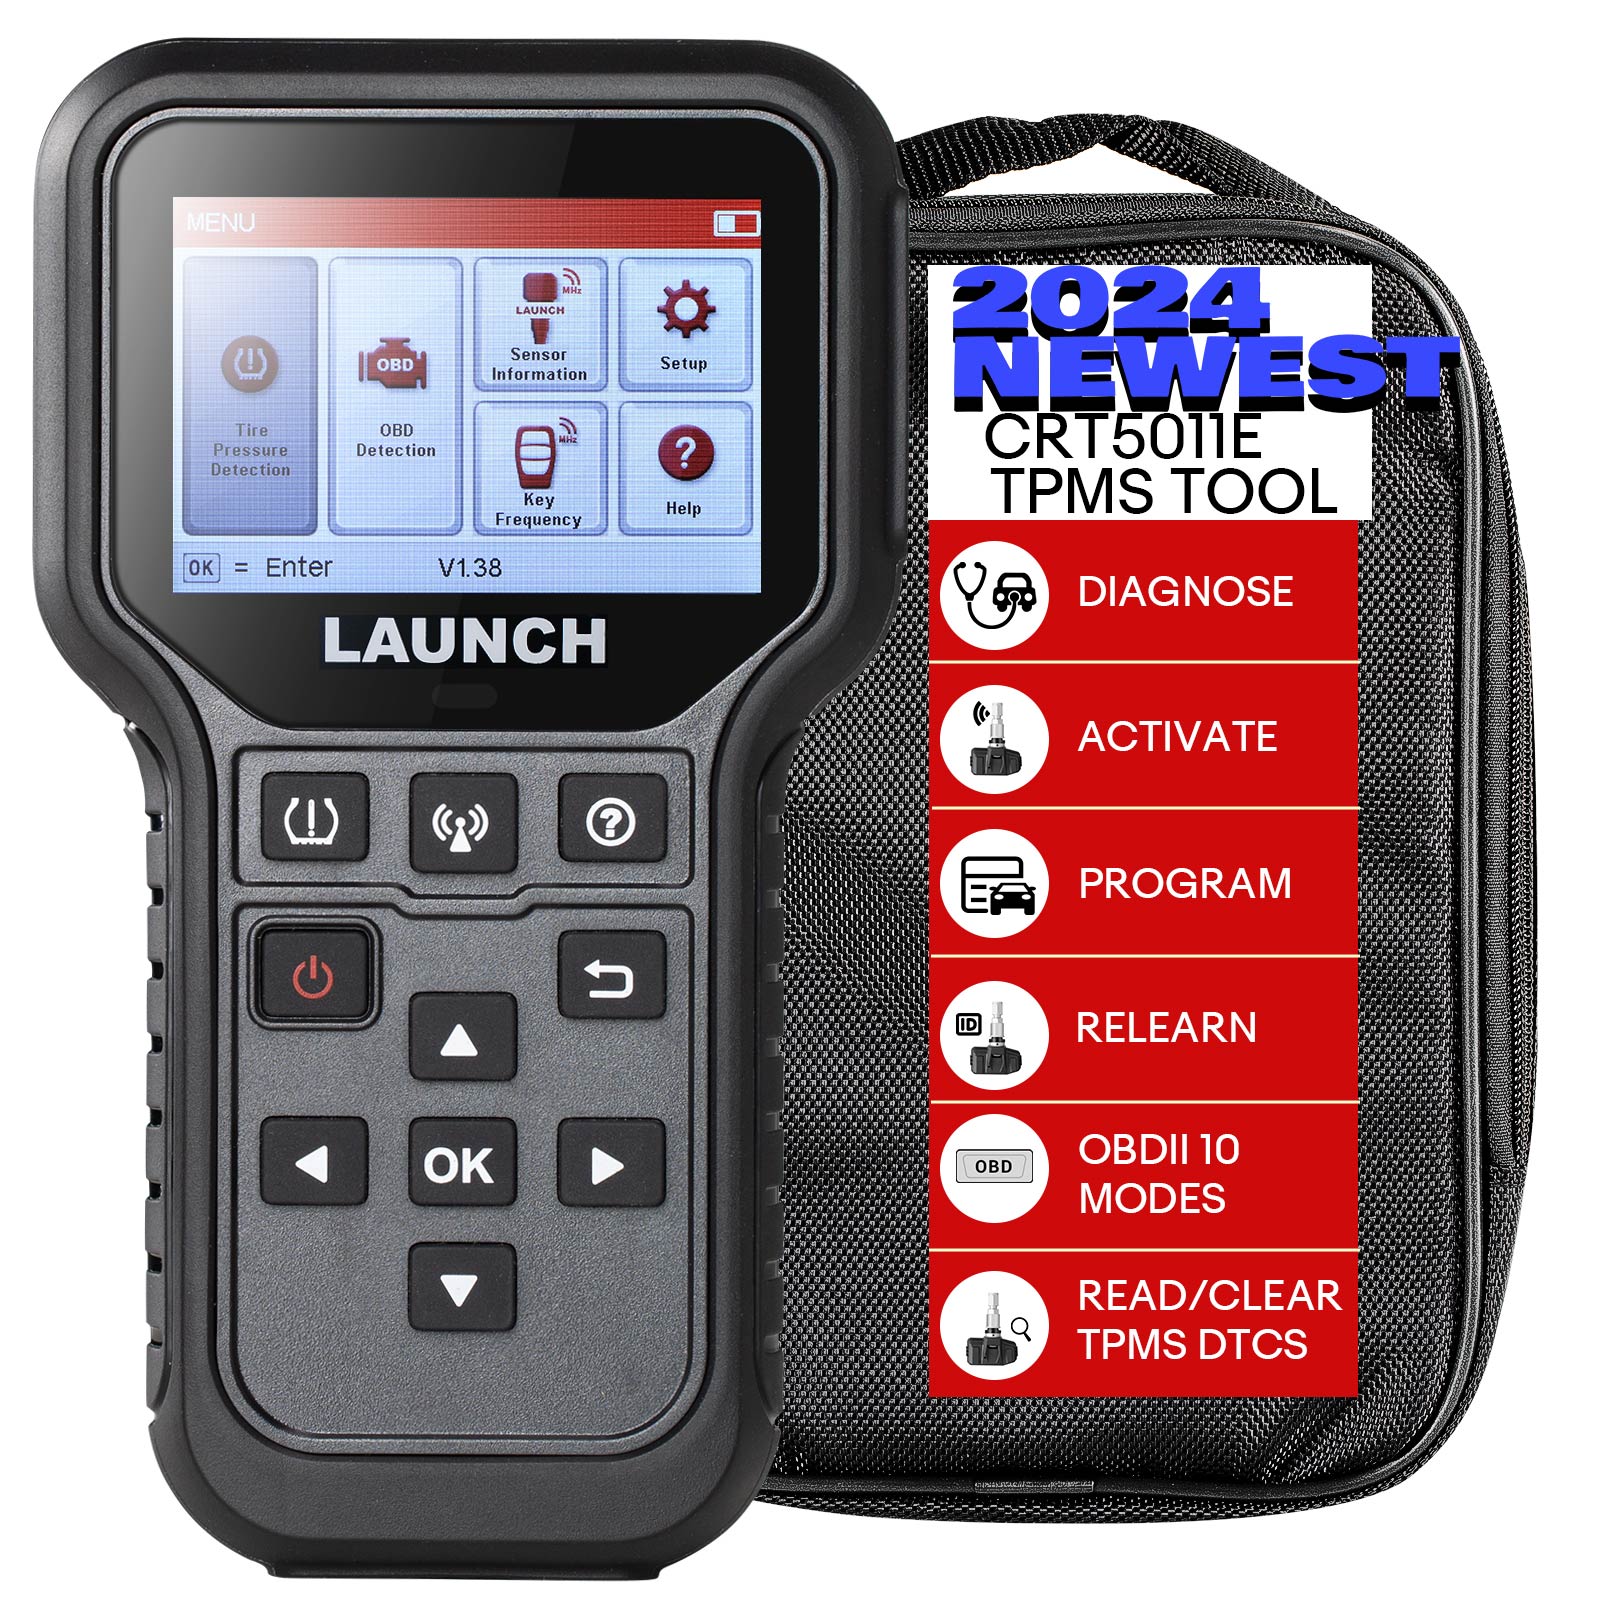 CRT5011E Advanced TPMS Tool support Diagnosis / Programming / Activation / Relearn